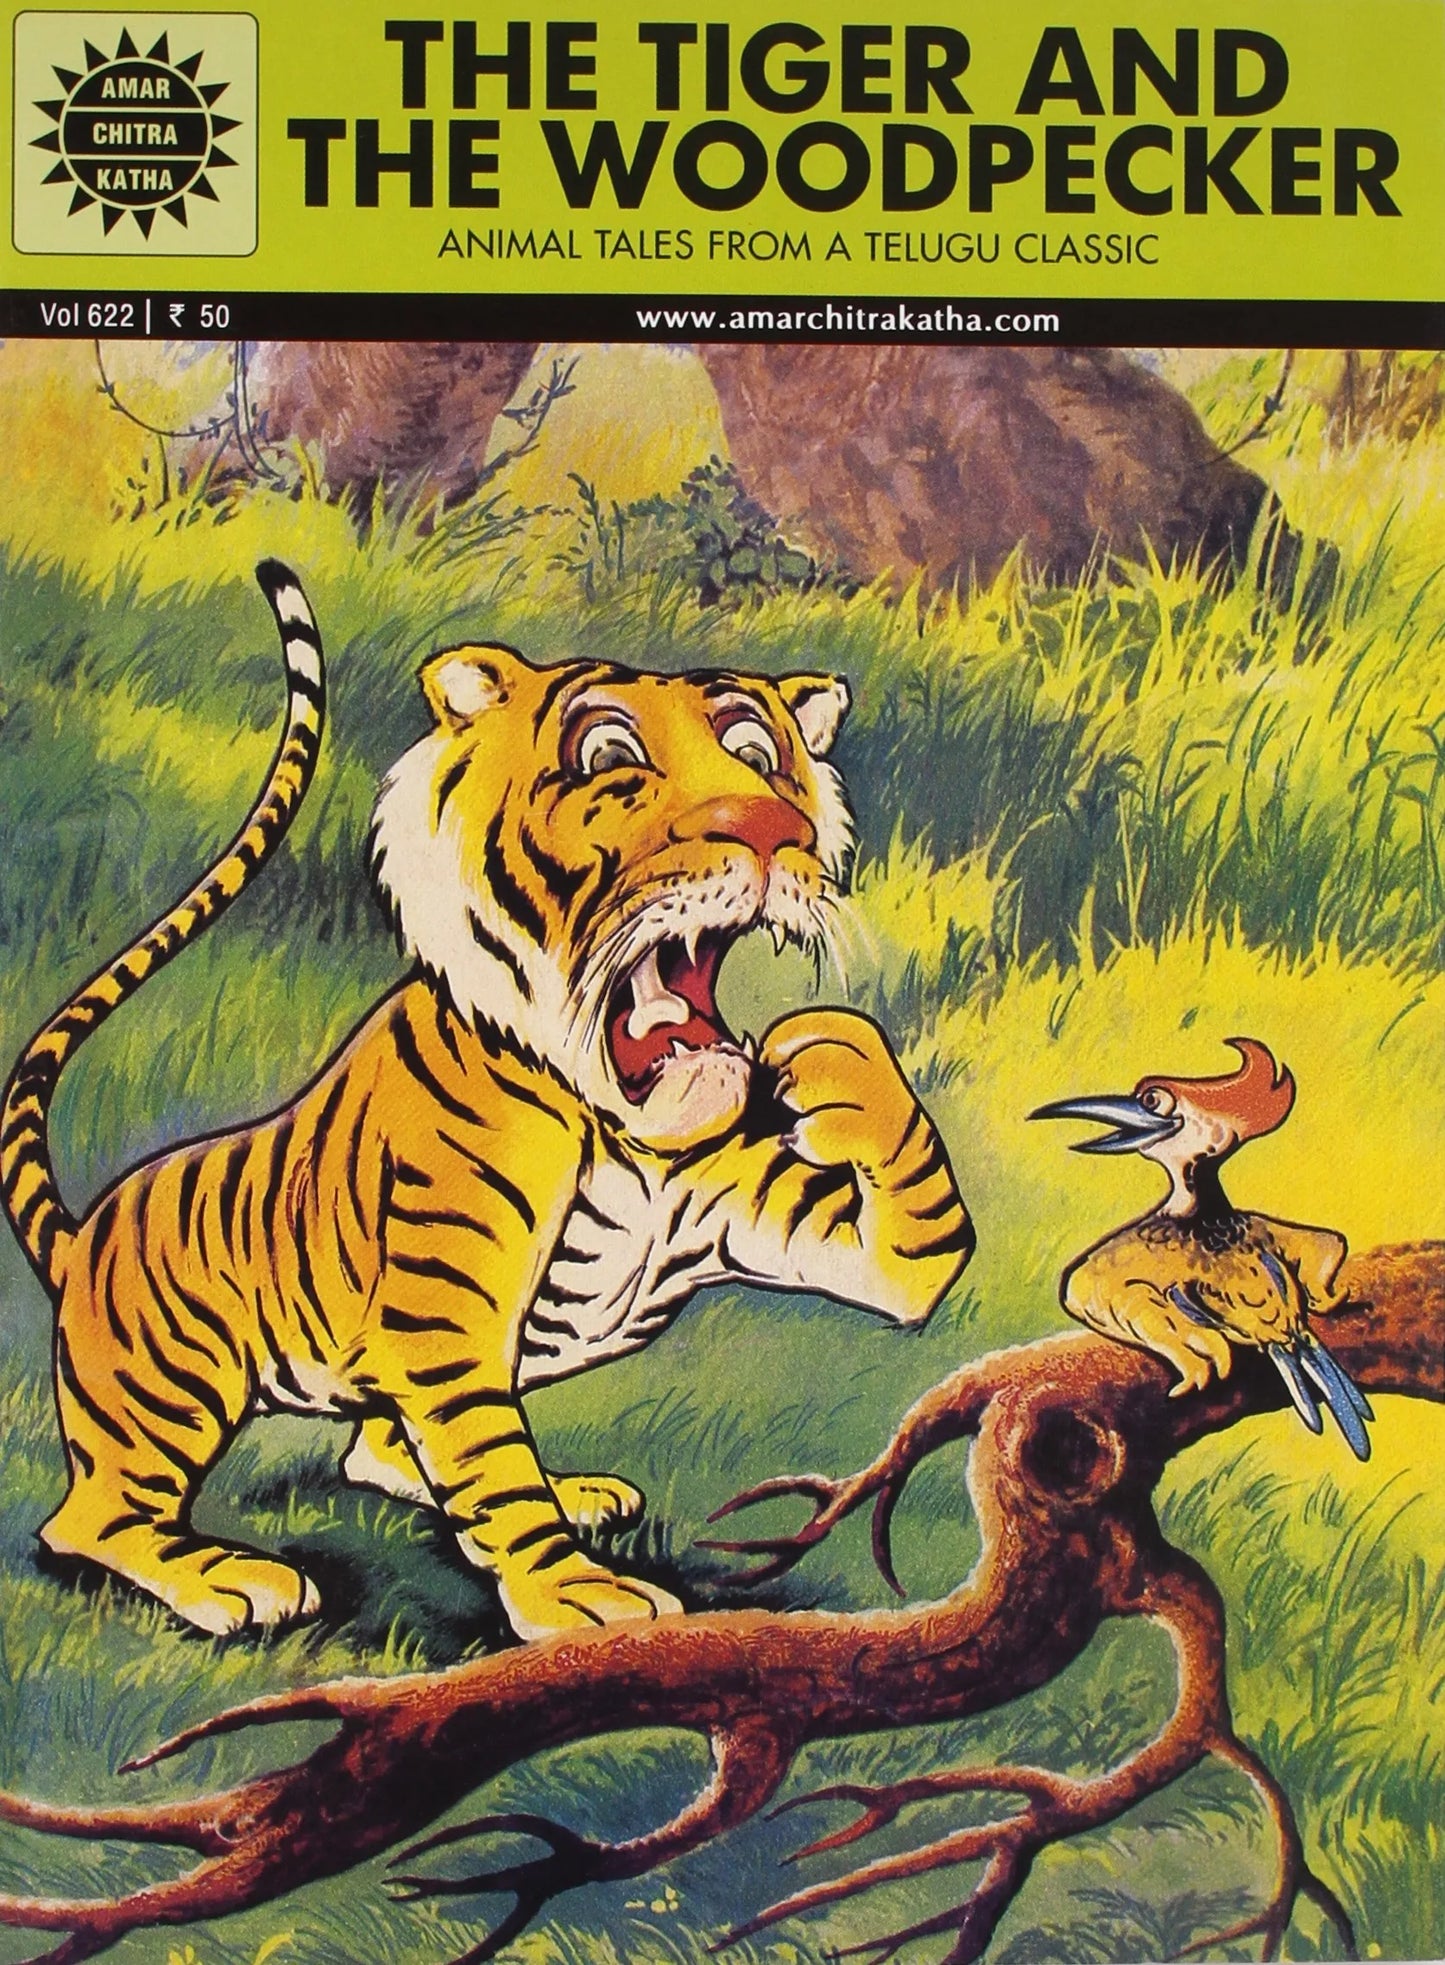 Amar Chitra Katha - Tiger And The Woodpecker - Animal Tales From A Telugu Classic